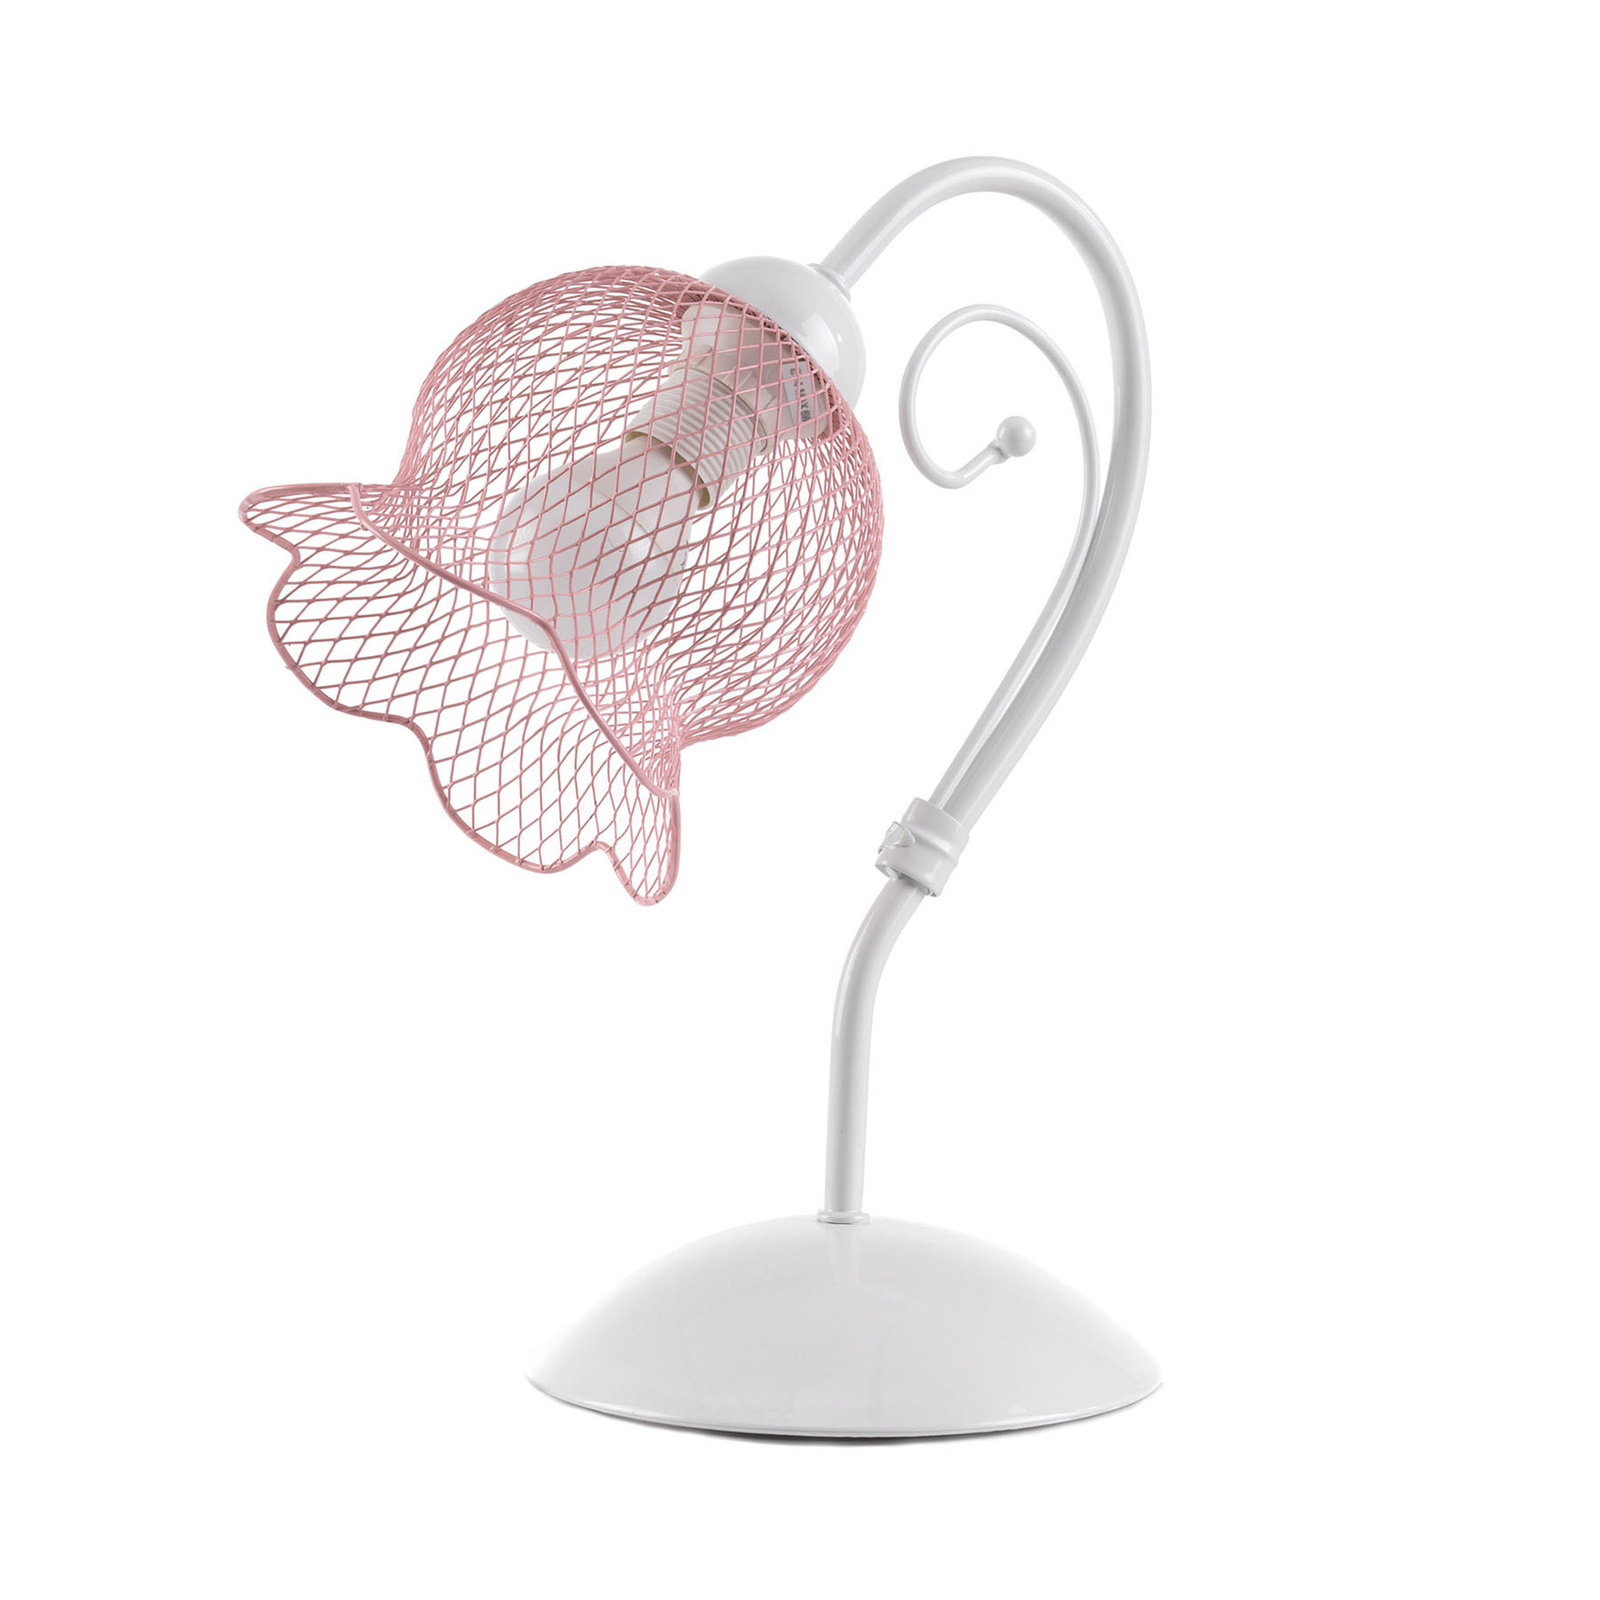 Mia Table Lamp With A Net Lampshade In, Mia Table Lamp